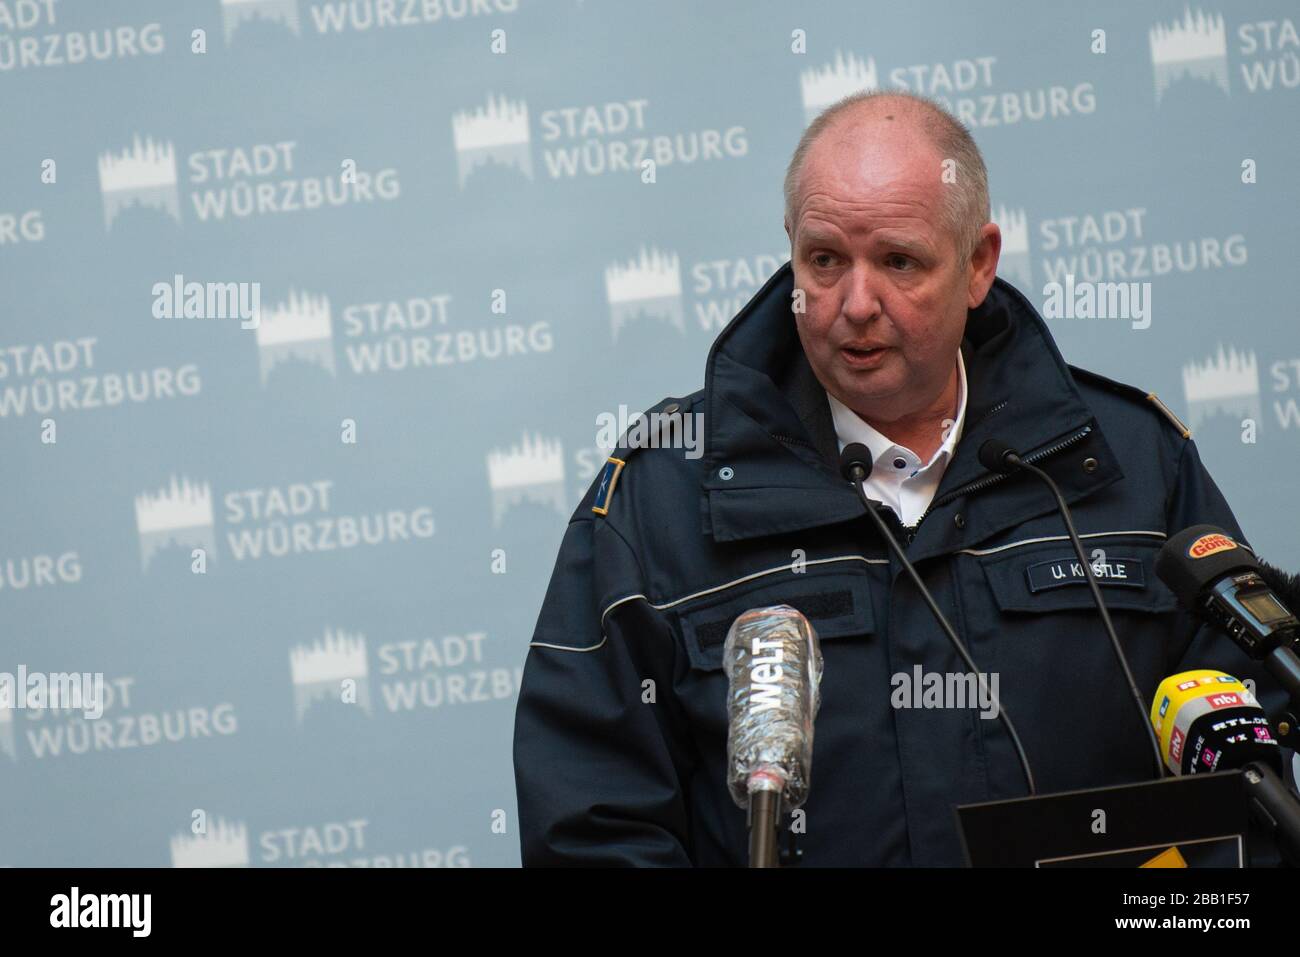 30 March 2020, Bavaria, Würzburg: At the press conference, Uwe Kinstle, Regional Director of the Johanniter-Unfall-Hilfe Würzburg, will speak about the current situation of the city and district of Würzburg regarding the spread of the coronavirus. Photo: Nicolas Armer/dpa Stock Photo